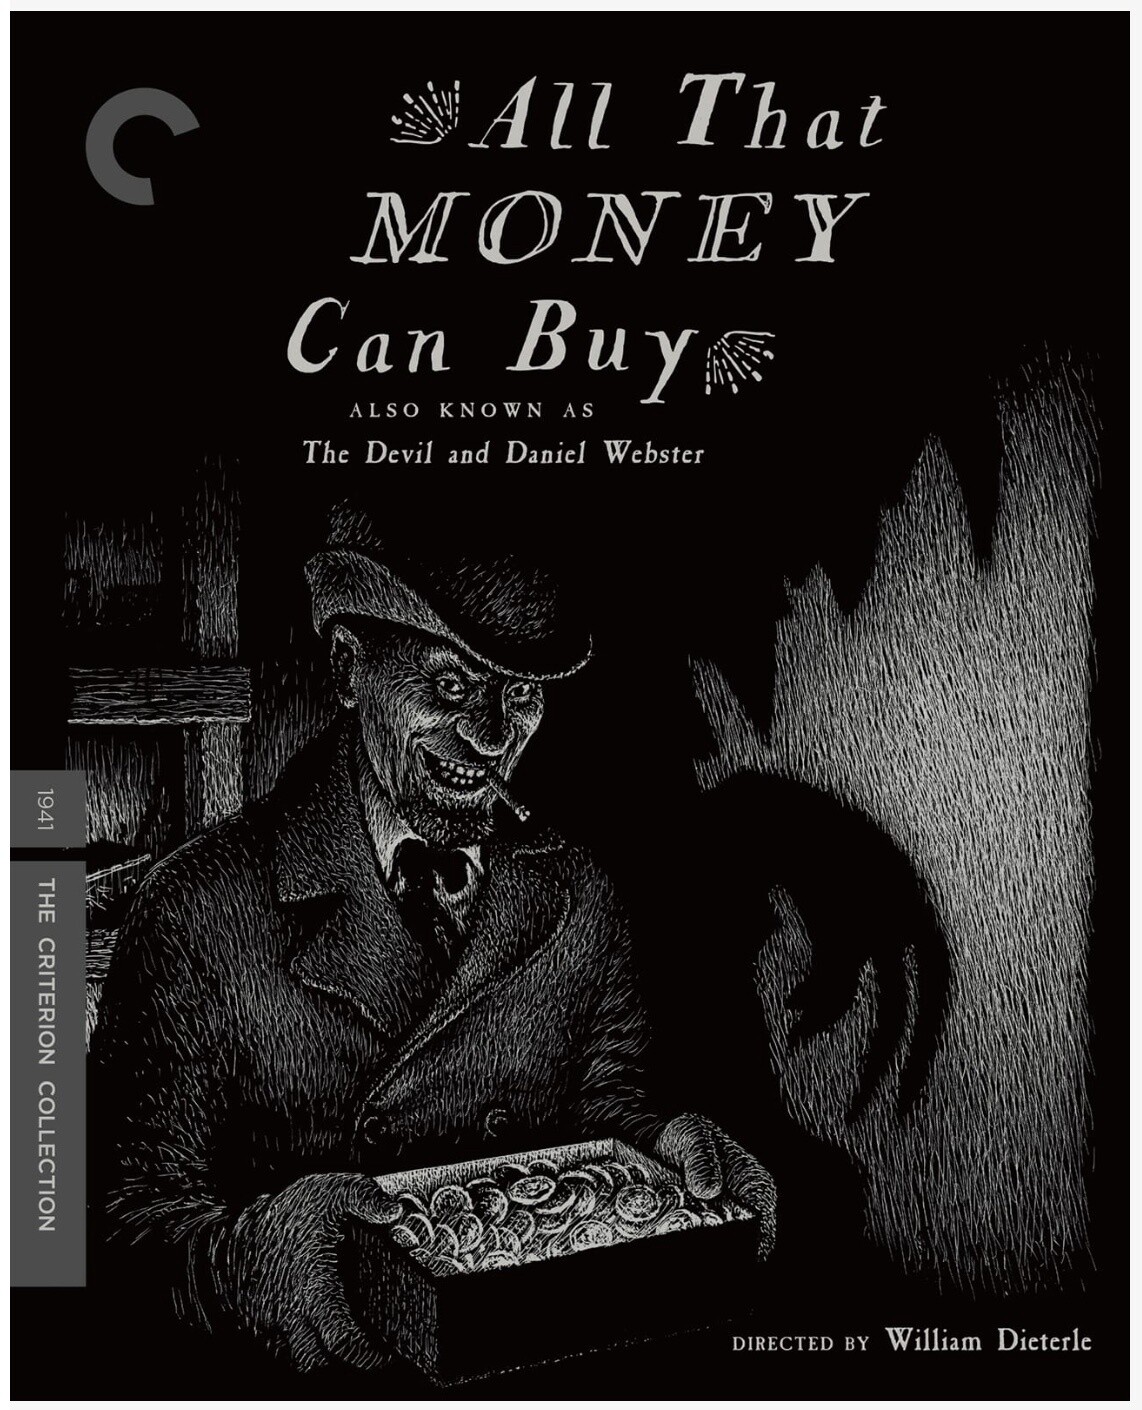 All That Money Can Buy (a.k.a. The Devil and Daniel Webster) Blu-ray ***Preorder*** 3/12